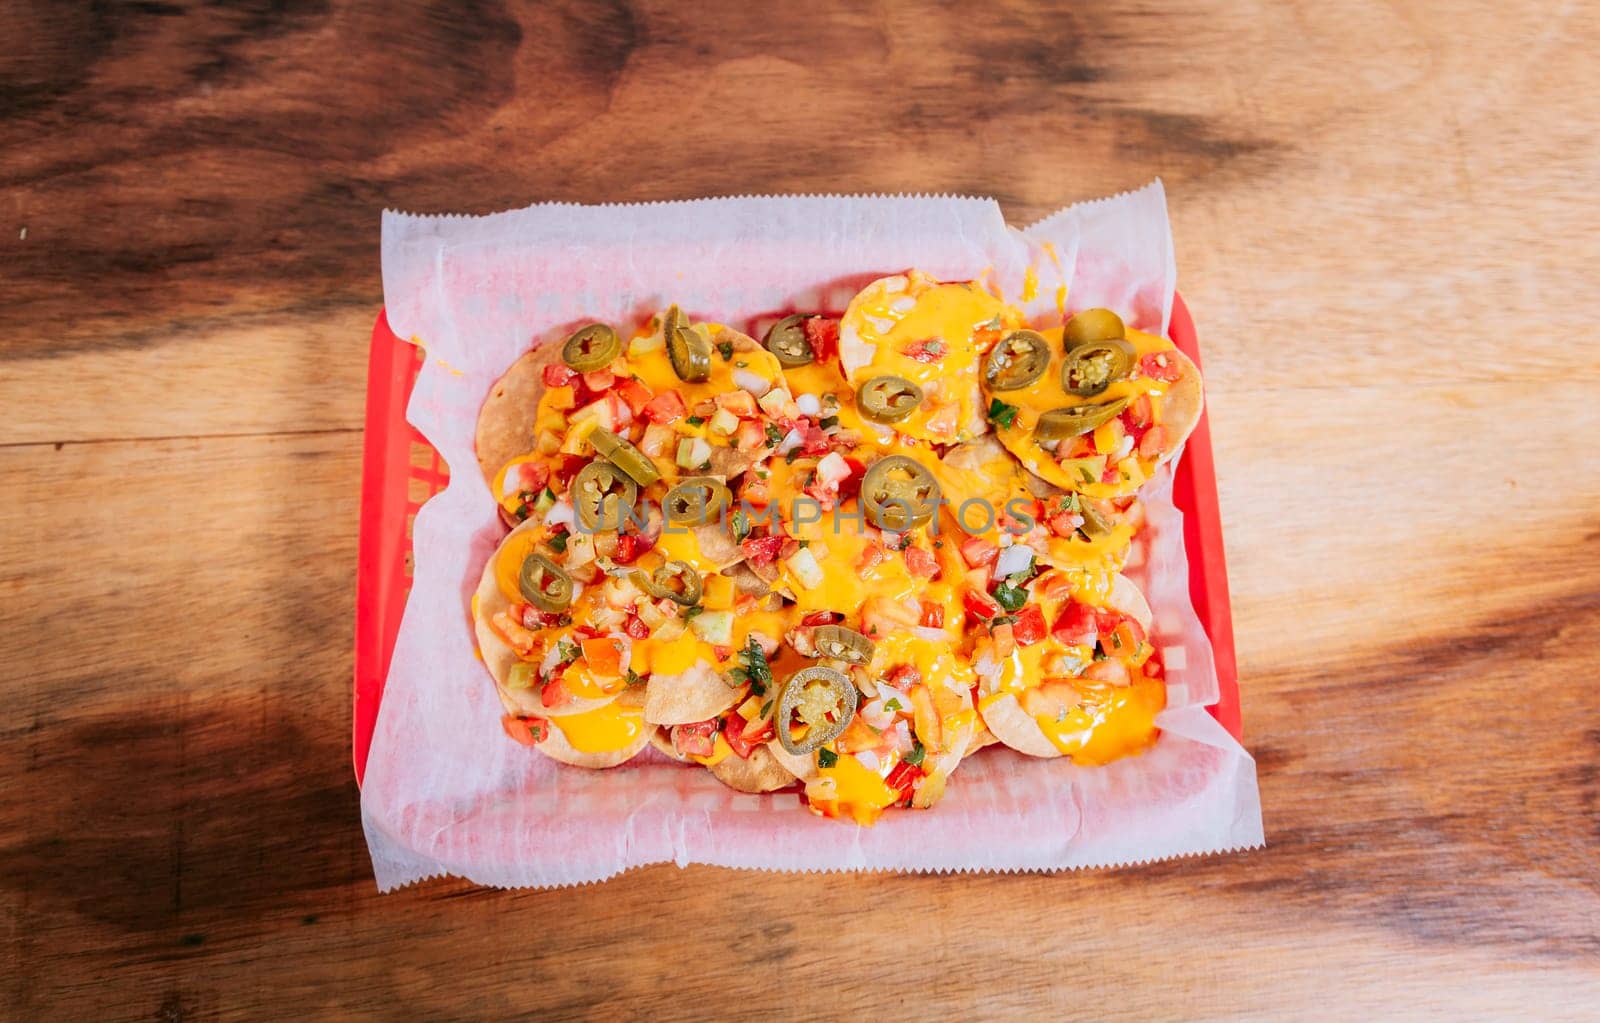 Top view of homemade nachos with jalapeno and melted cheese on wooden table. Mexican nachos with melted cheese and jalapeno by isaiphoto